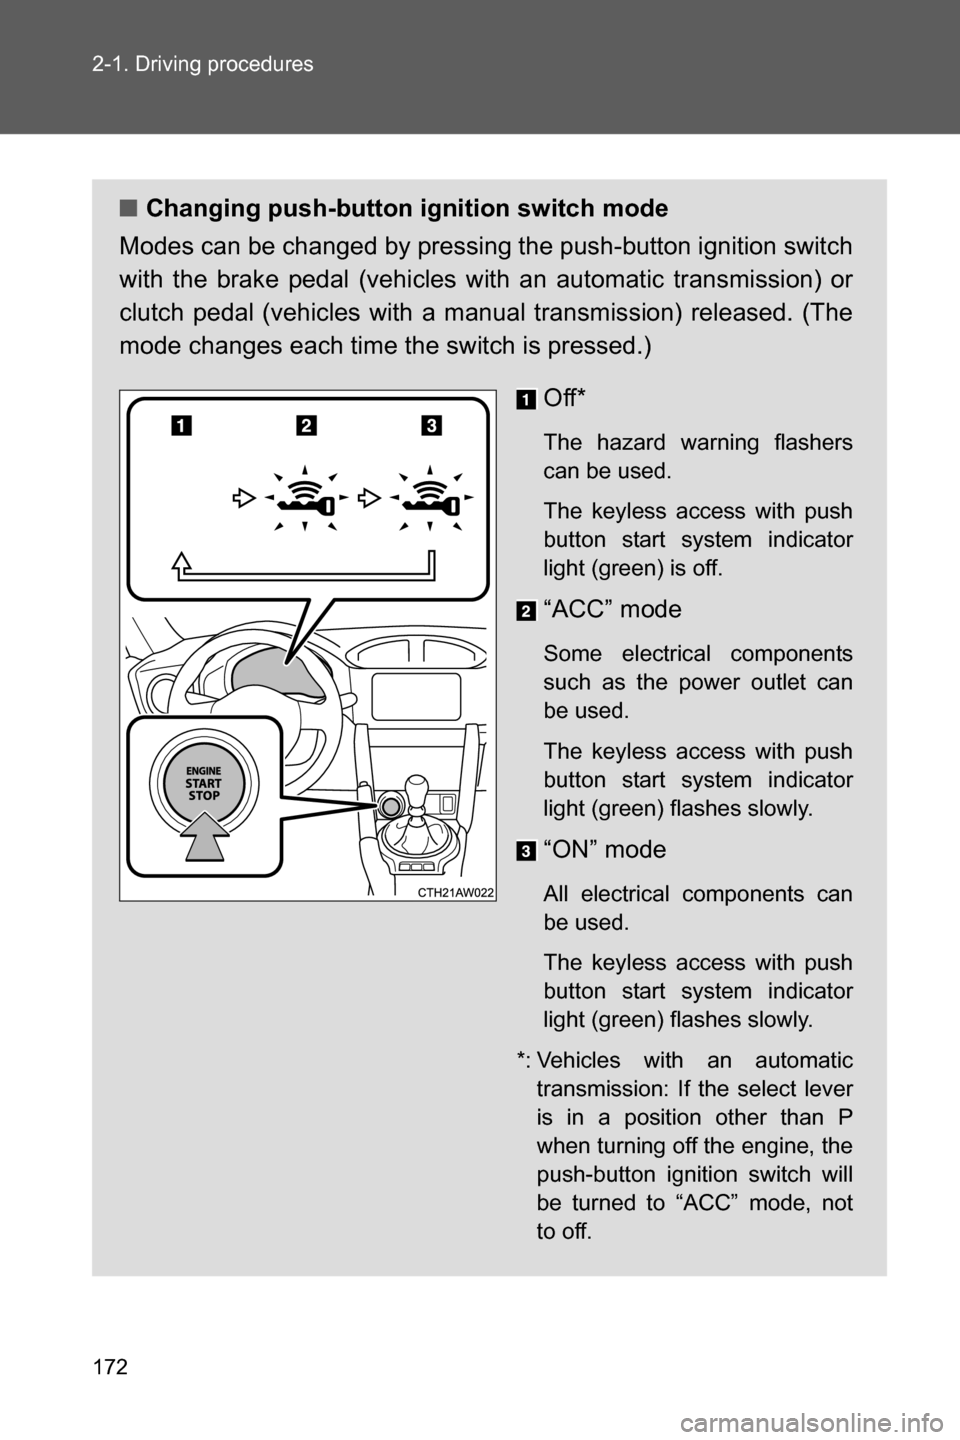 SUBARU BRZ 2017 1.G User Guide 172 2-1. Driving procedures
■Changing push-button ignition switch mode
Modes can be changed by pressing the push-button ignition switch
with the brake pedal (vehicles with an automatic transmission)